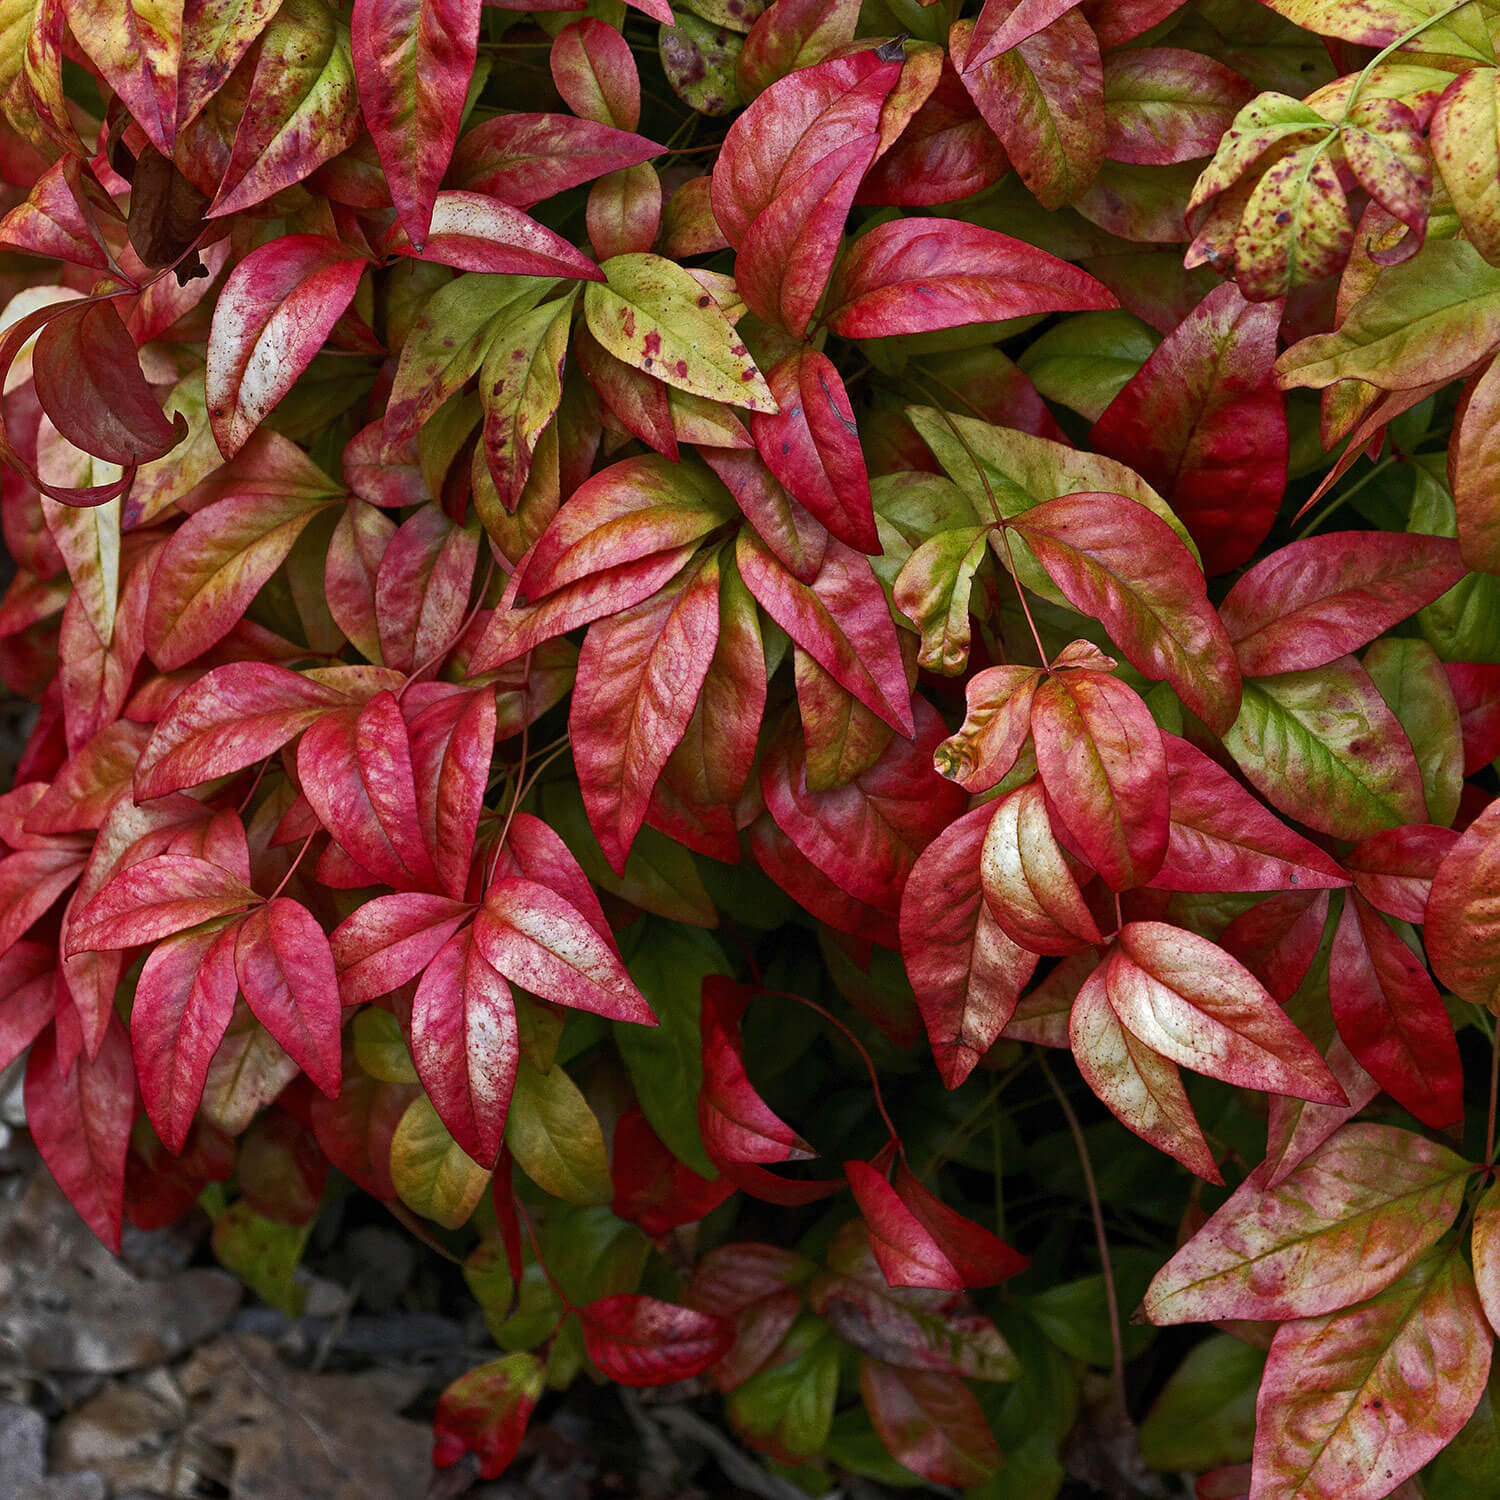 Foliage closeup of Nandina domestica 'Firepower' leaves in red, green and orange colors